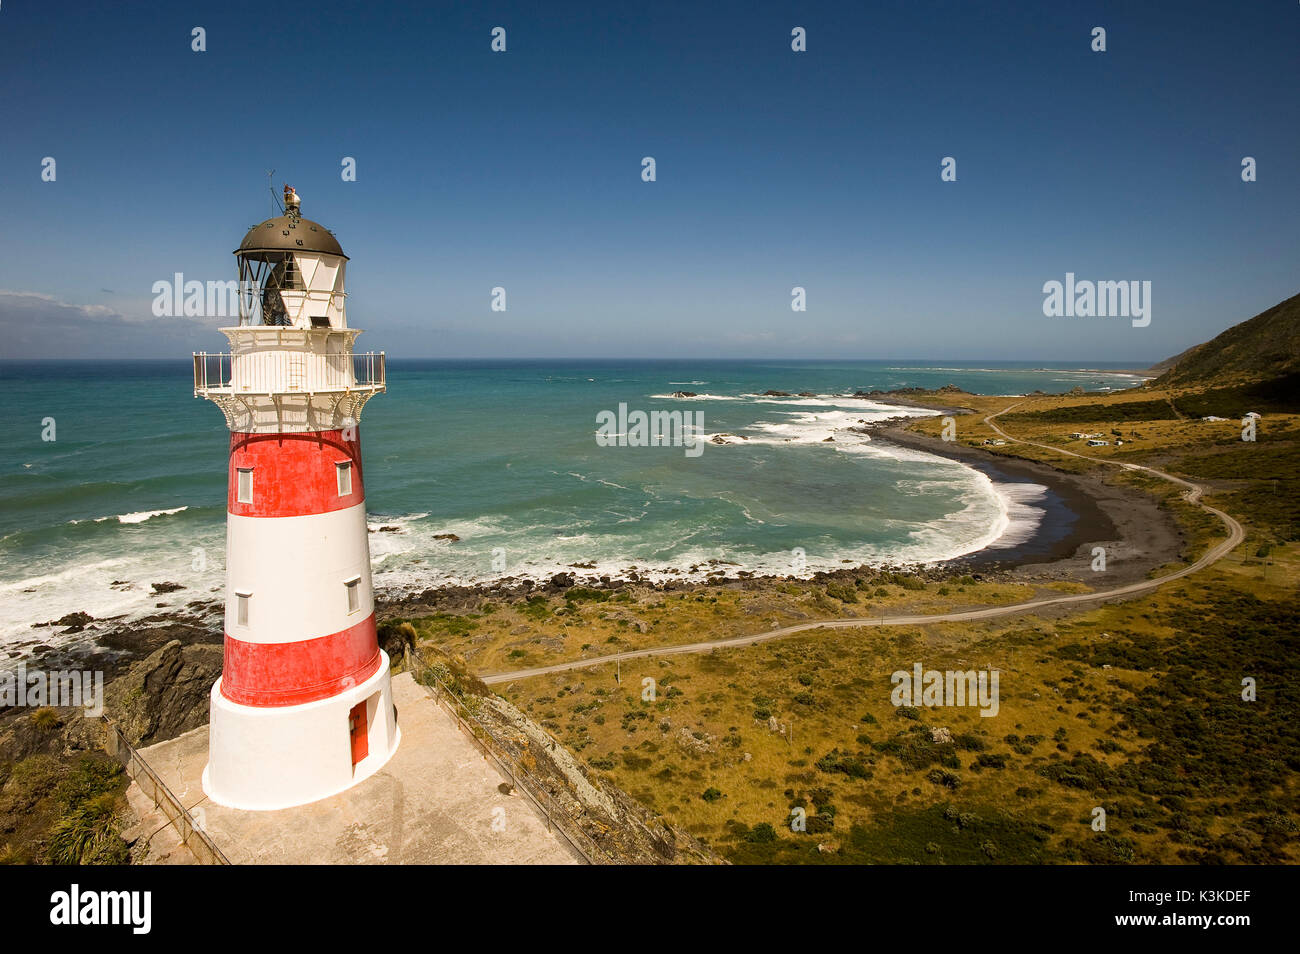 The lighthouse of cape Palliser at the southern end of the north island of New Zealand with bringing streeds and settlement. Stock Photo